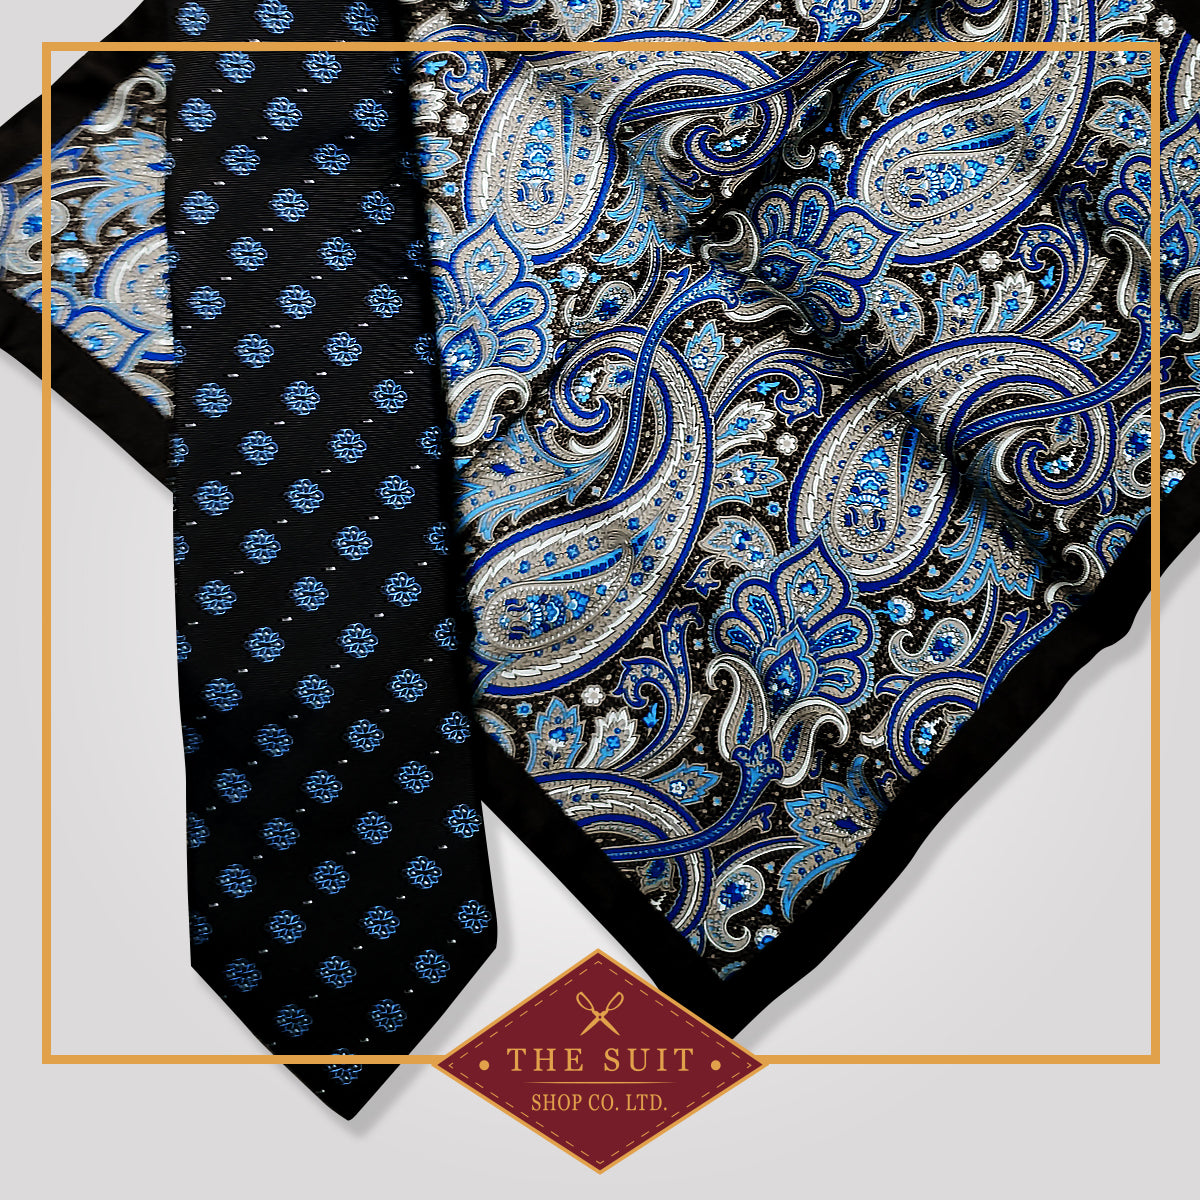 Baltic Sea Tie and East Bay Patterned Pocket Square